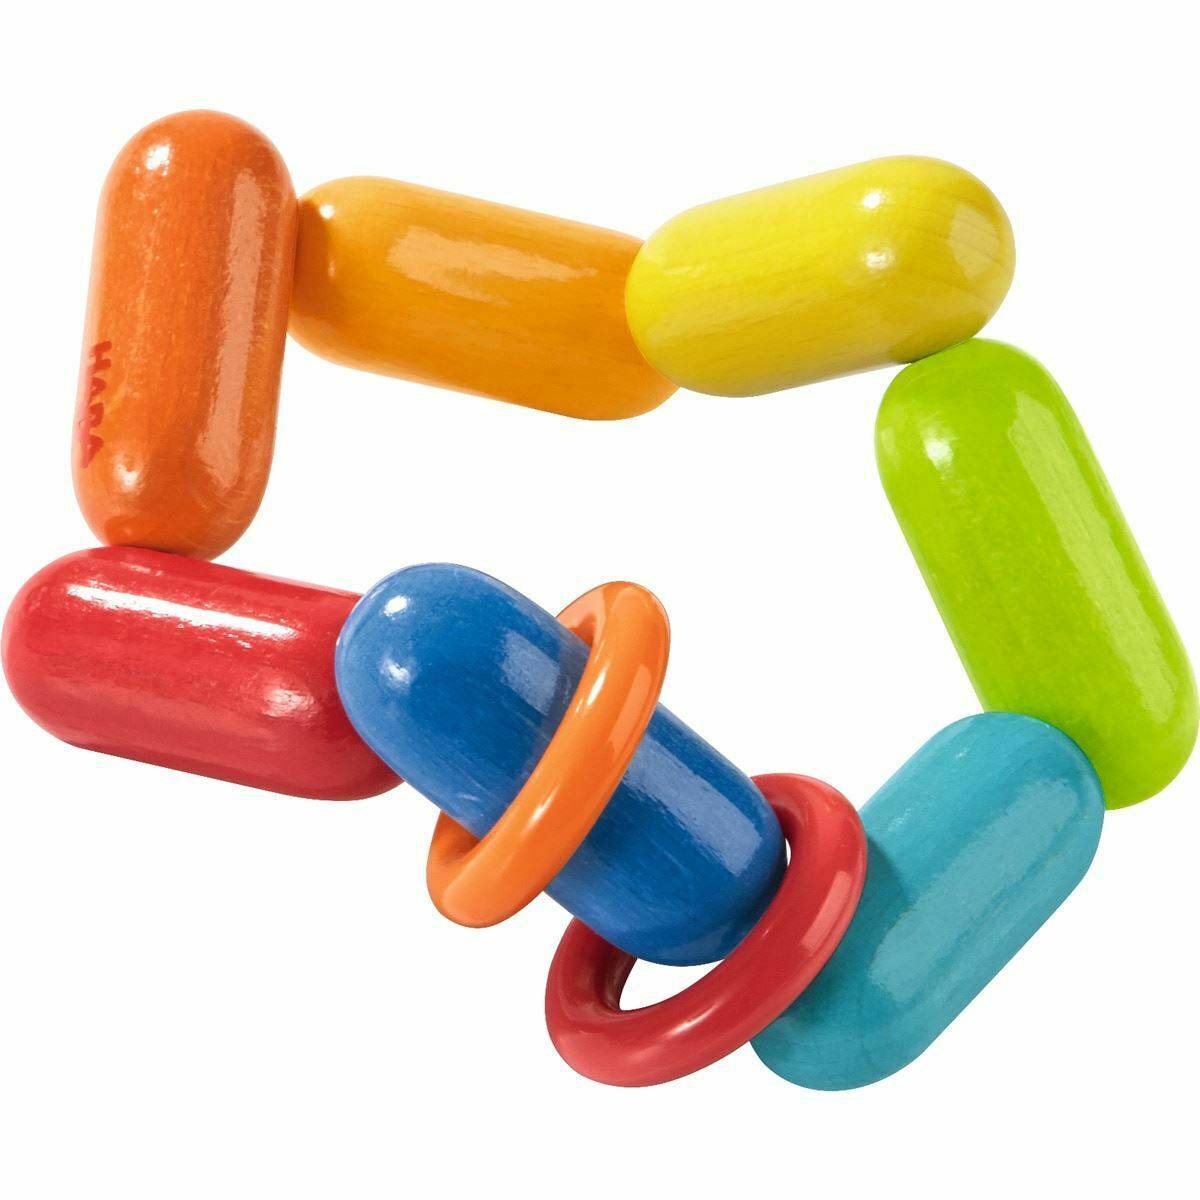 Haba Dilly Dally Wooden Rattle with Plastic Rings | Pacifiers